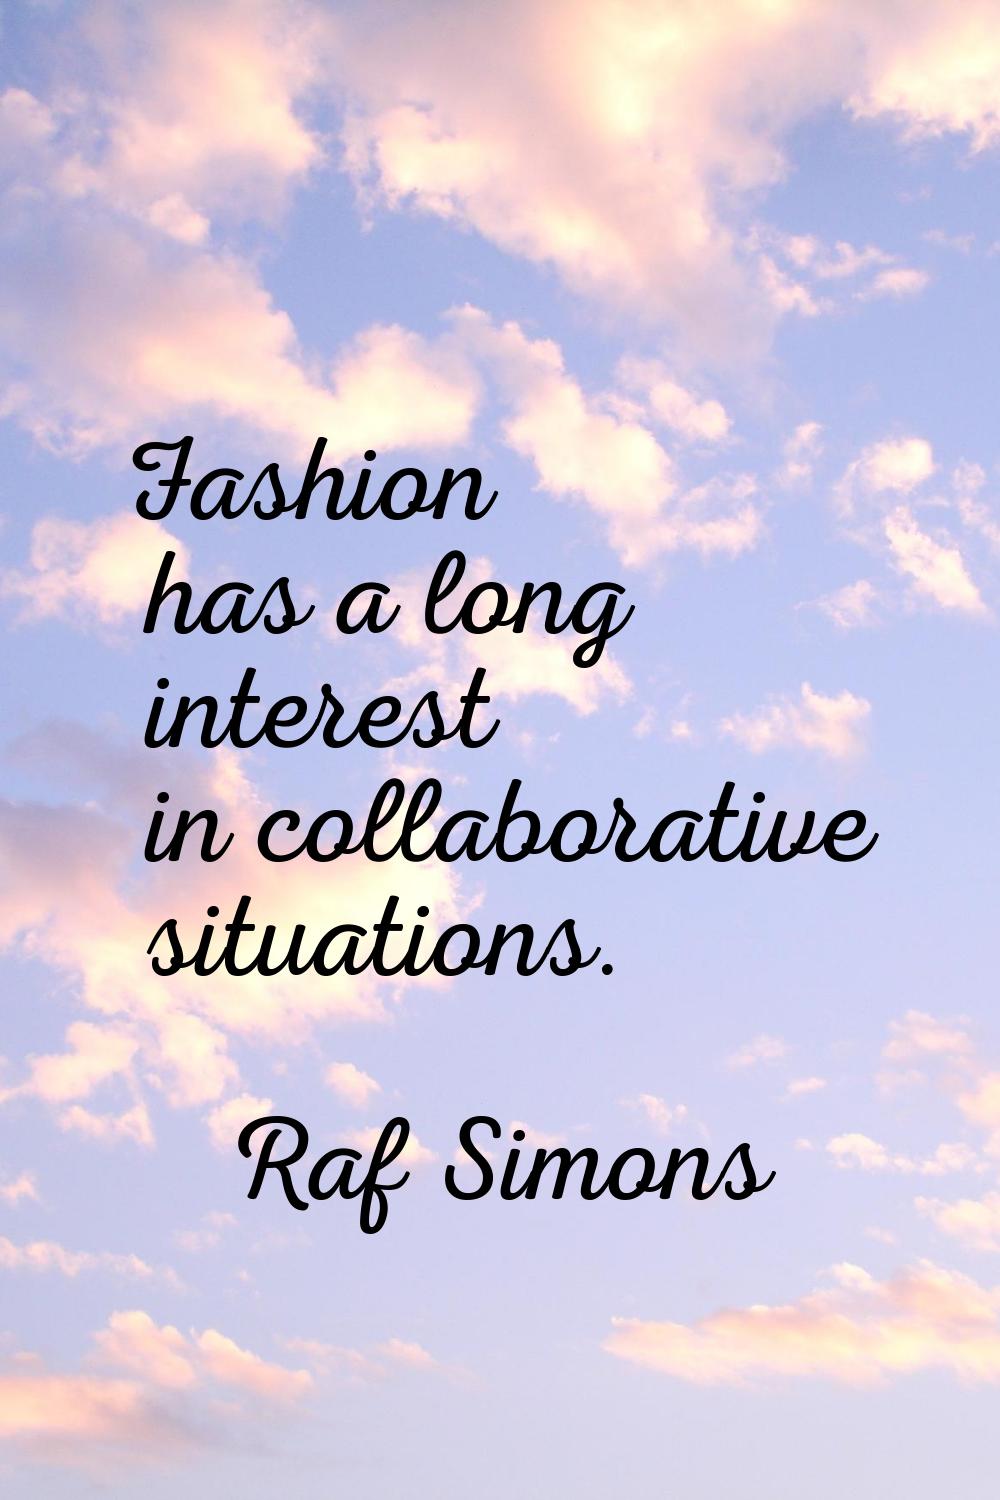 Fashion has a long interest in collaborative situations.